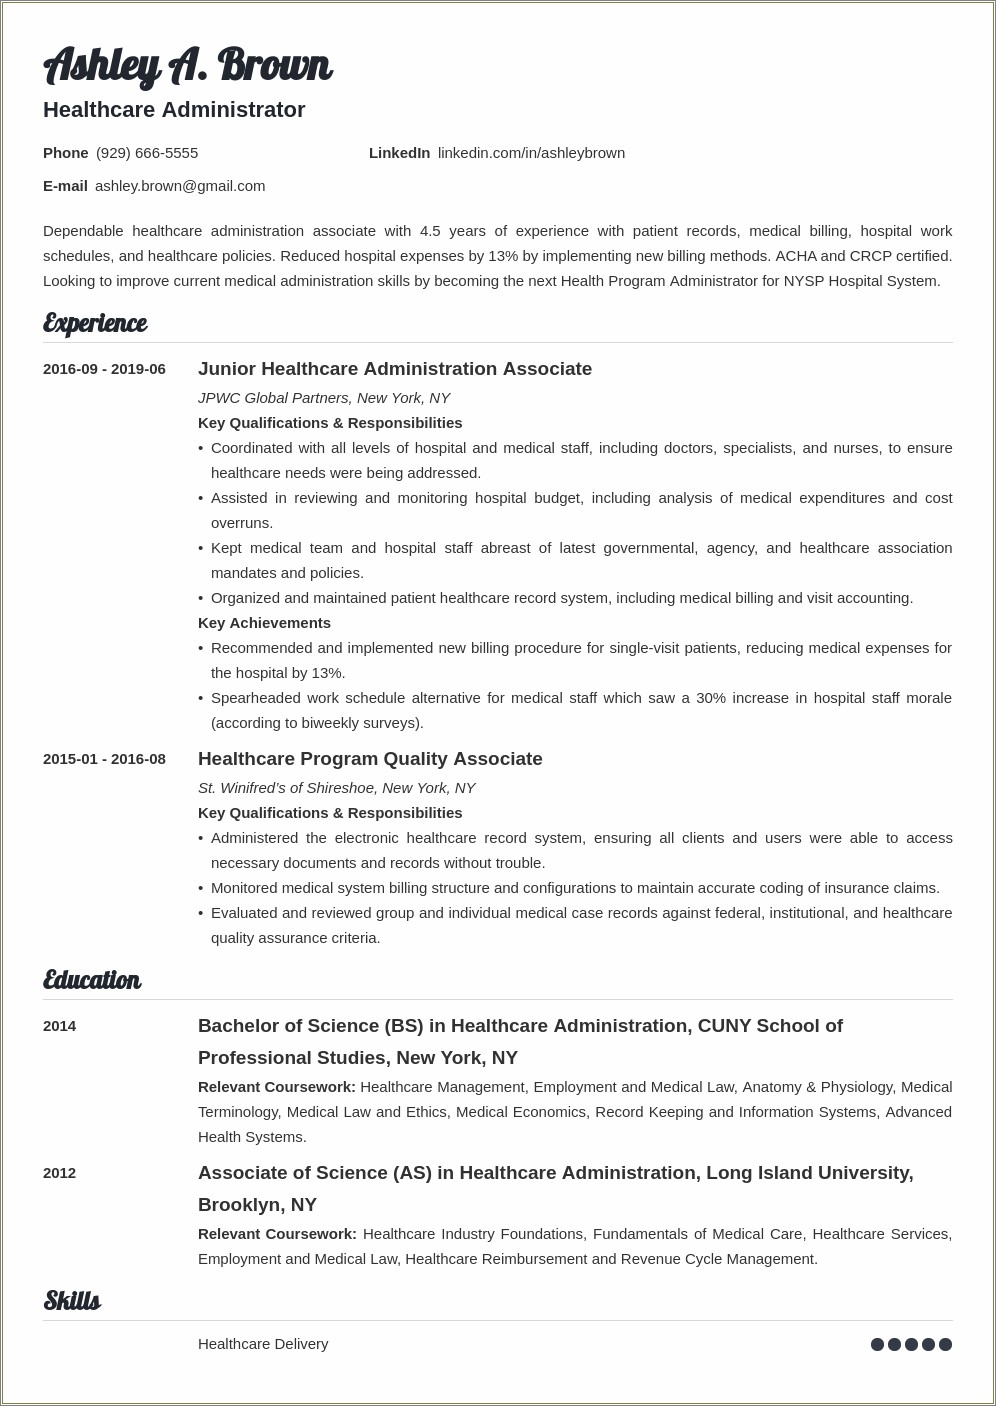 Medical Records And Health Information Technicians Sample Resume